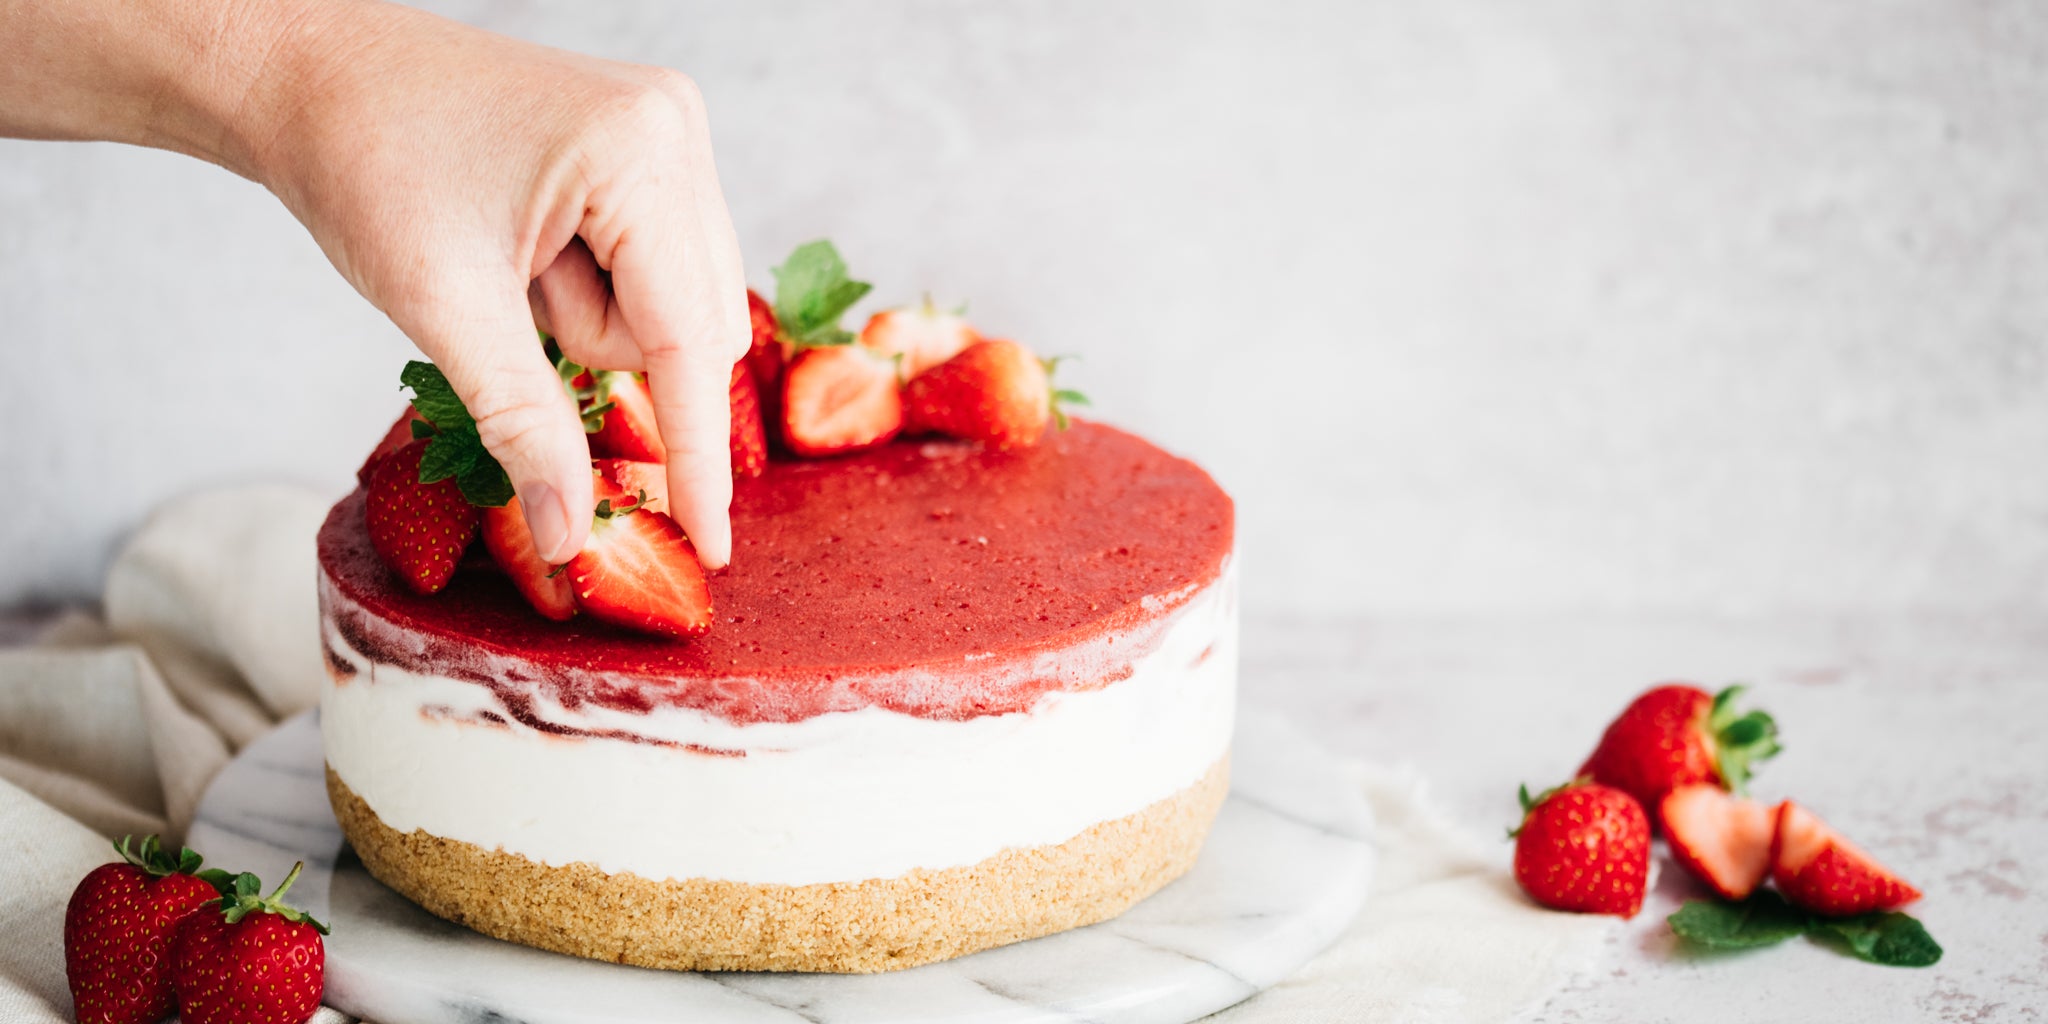 Hand placing strawberry on top of cheesecake